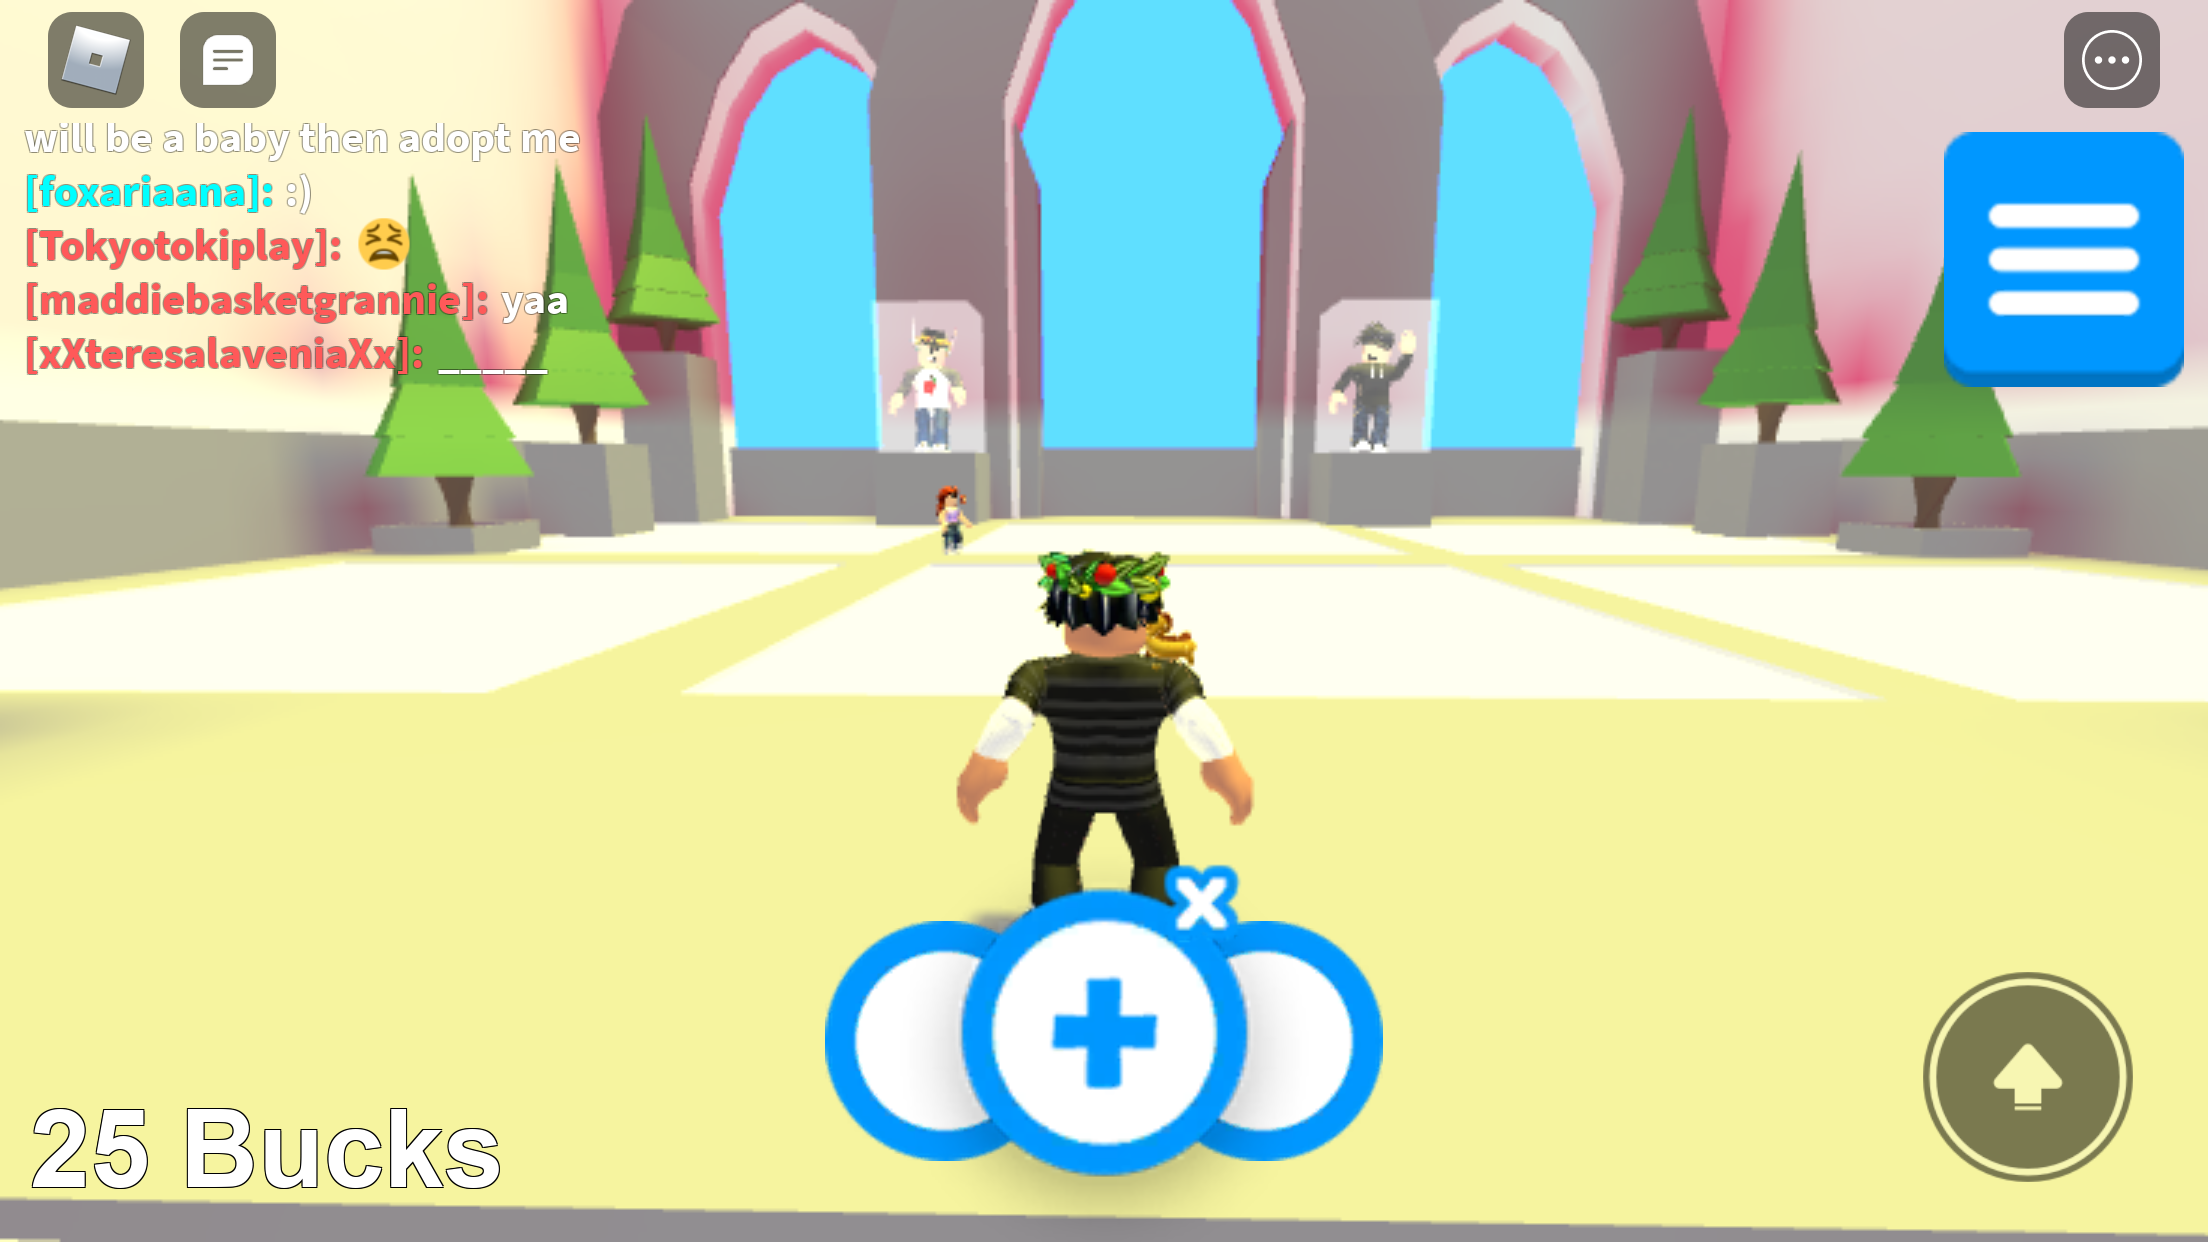 Guys There Is A Game Tht Has The Old Adopt Me Version O Fandom - roblox adopt me discord link